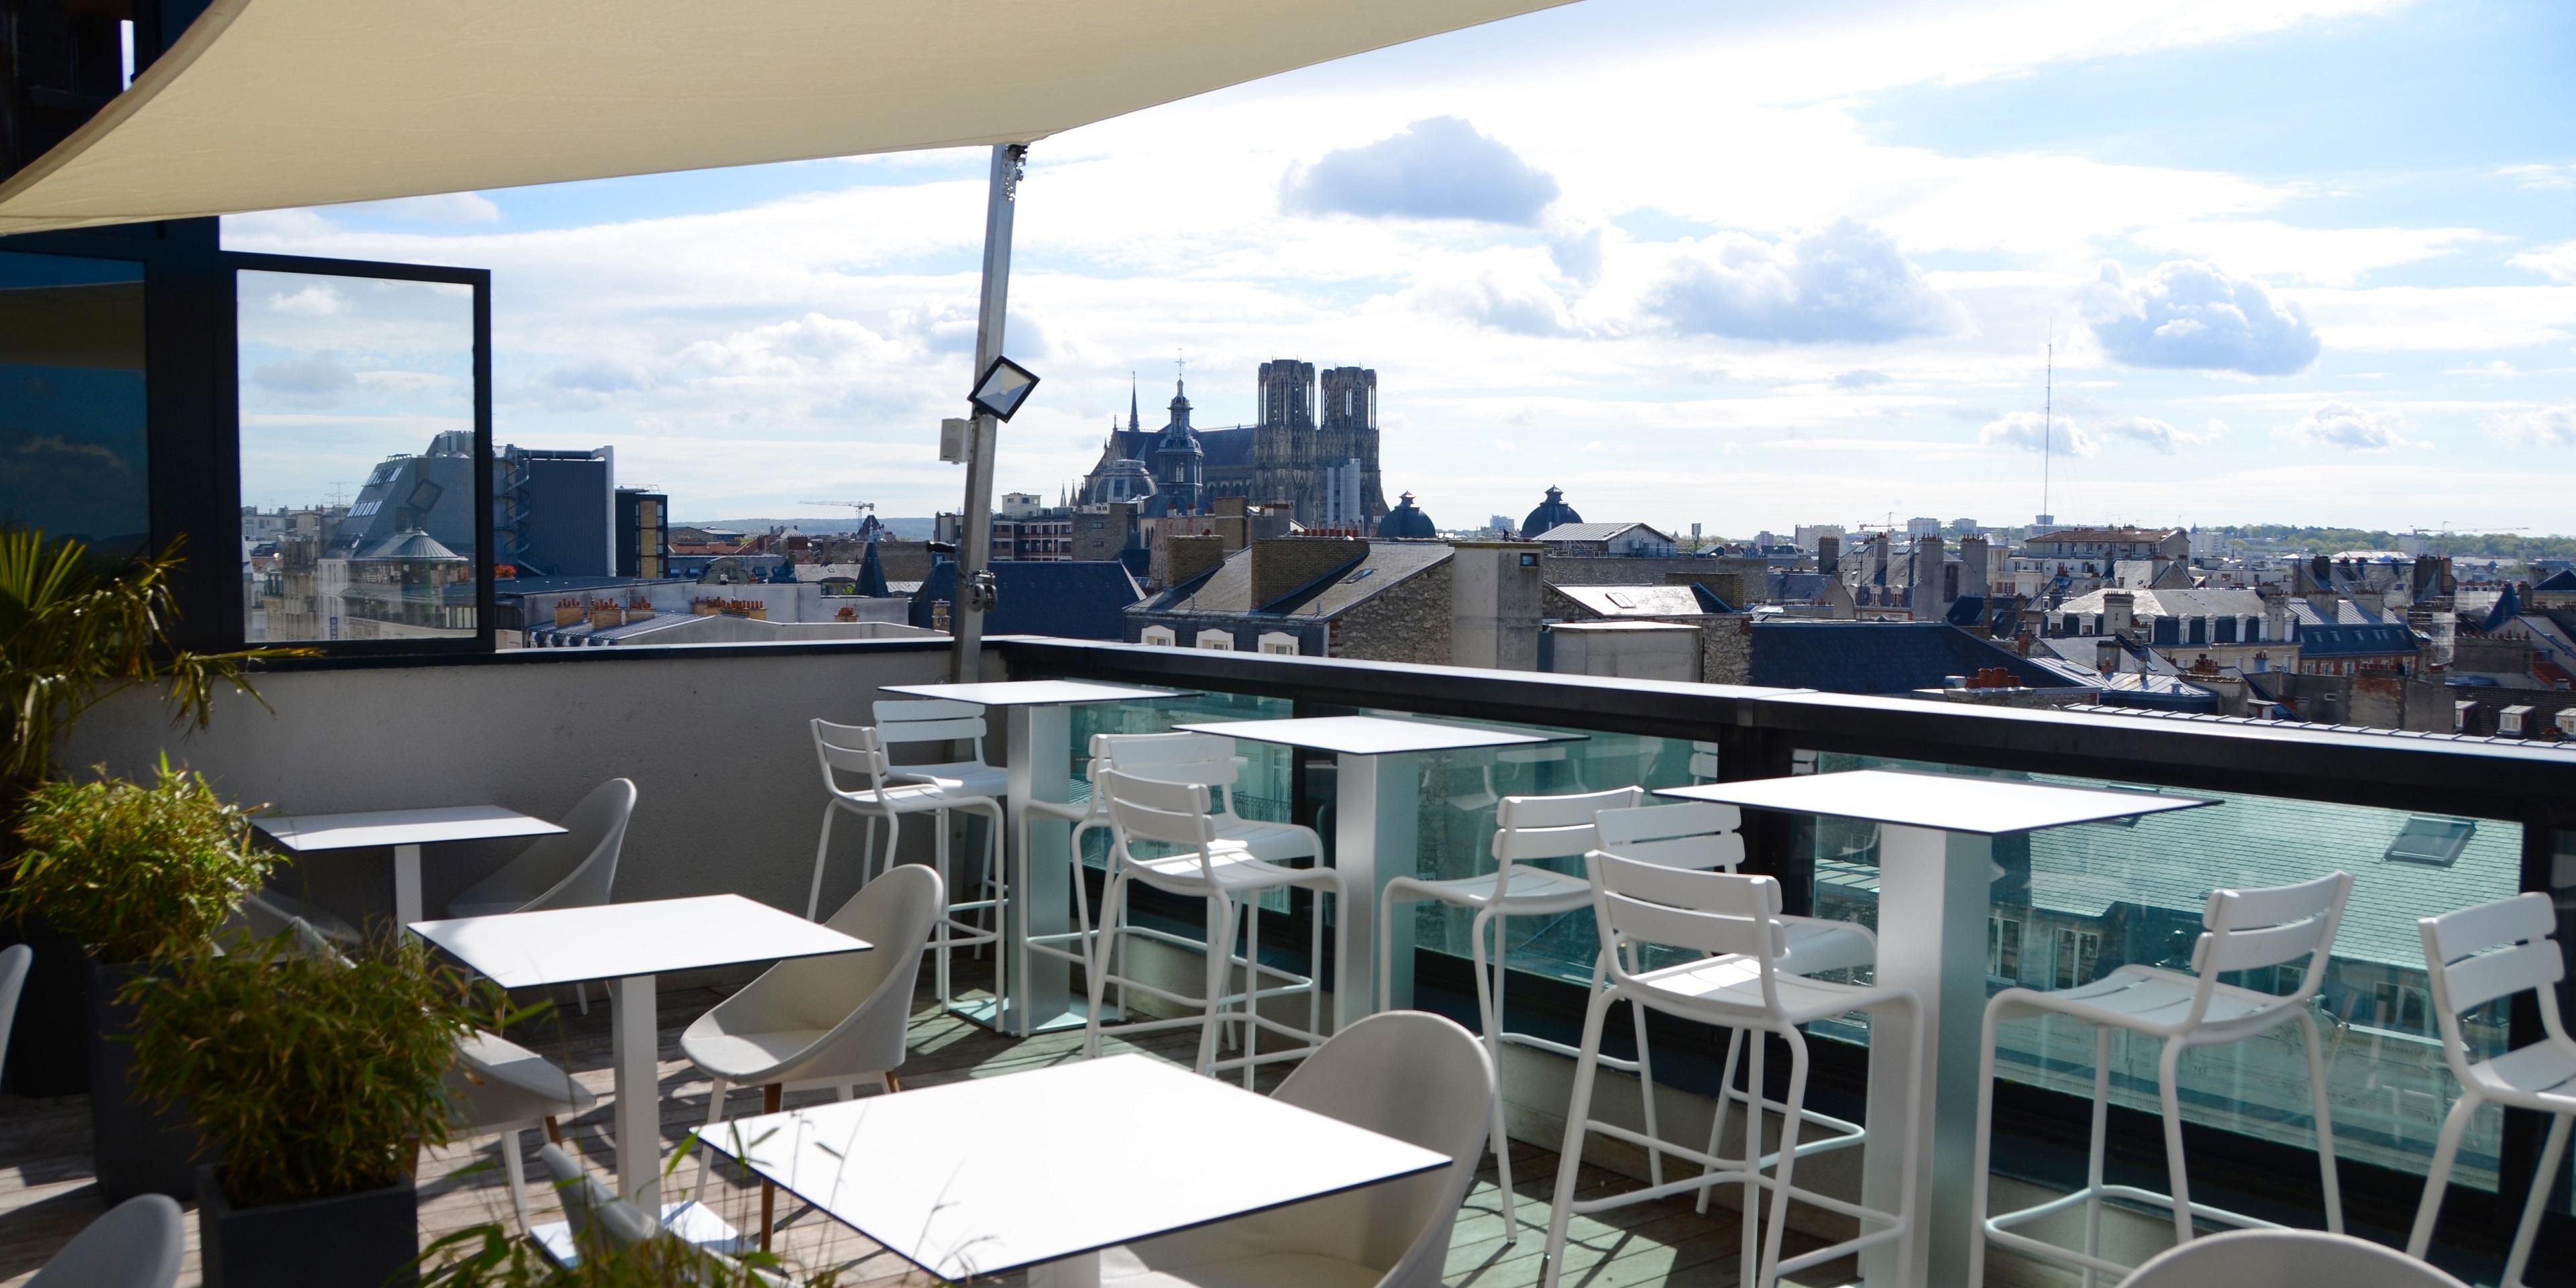 Rooftop terrace of the restaurant and bar, on the 7th floor